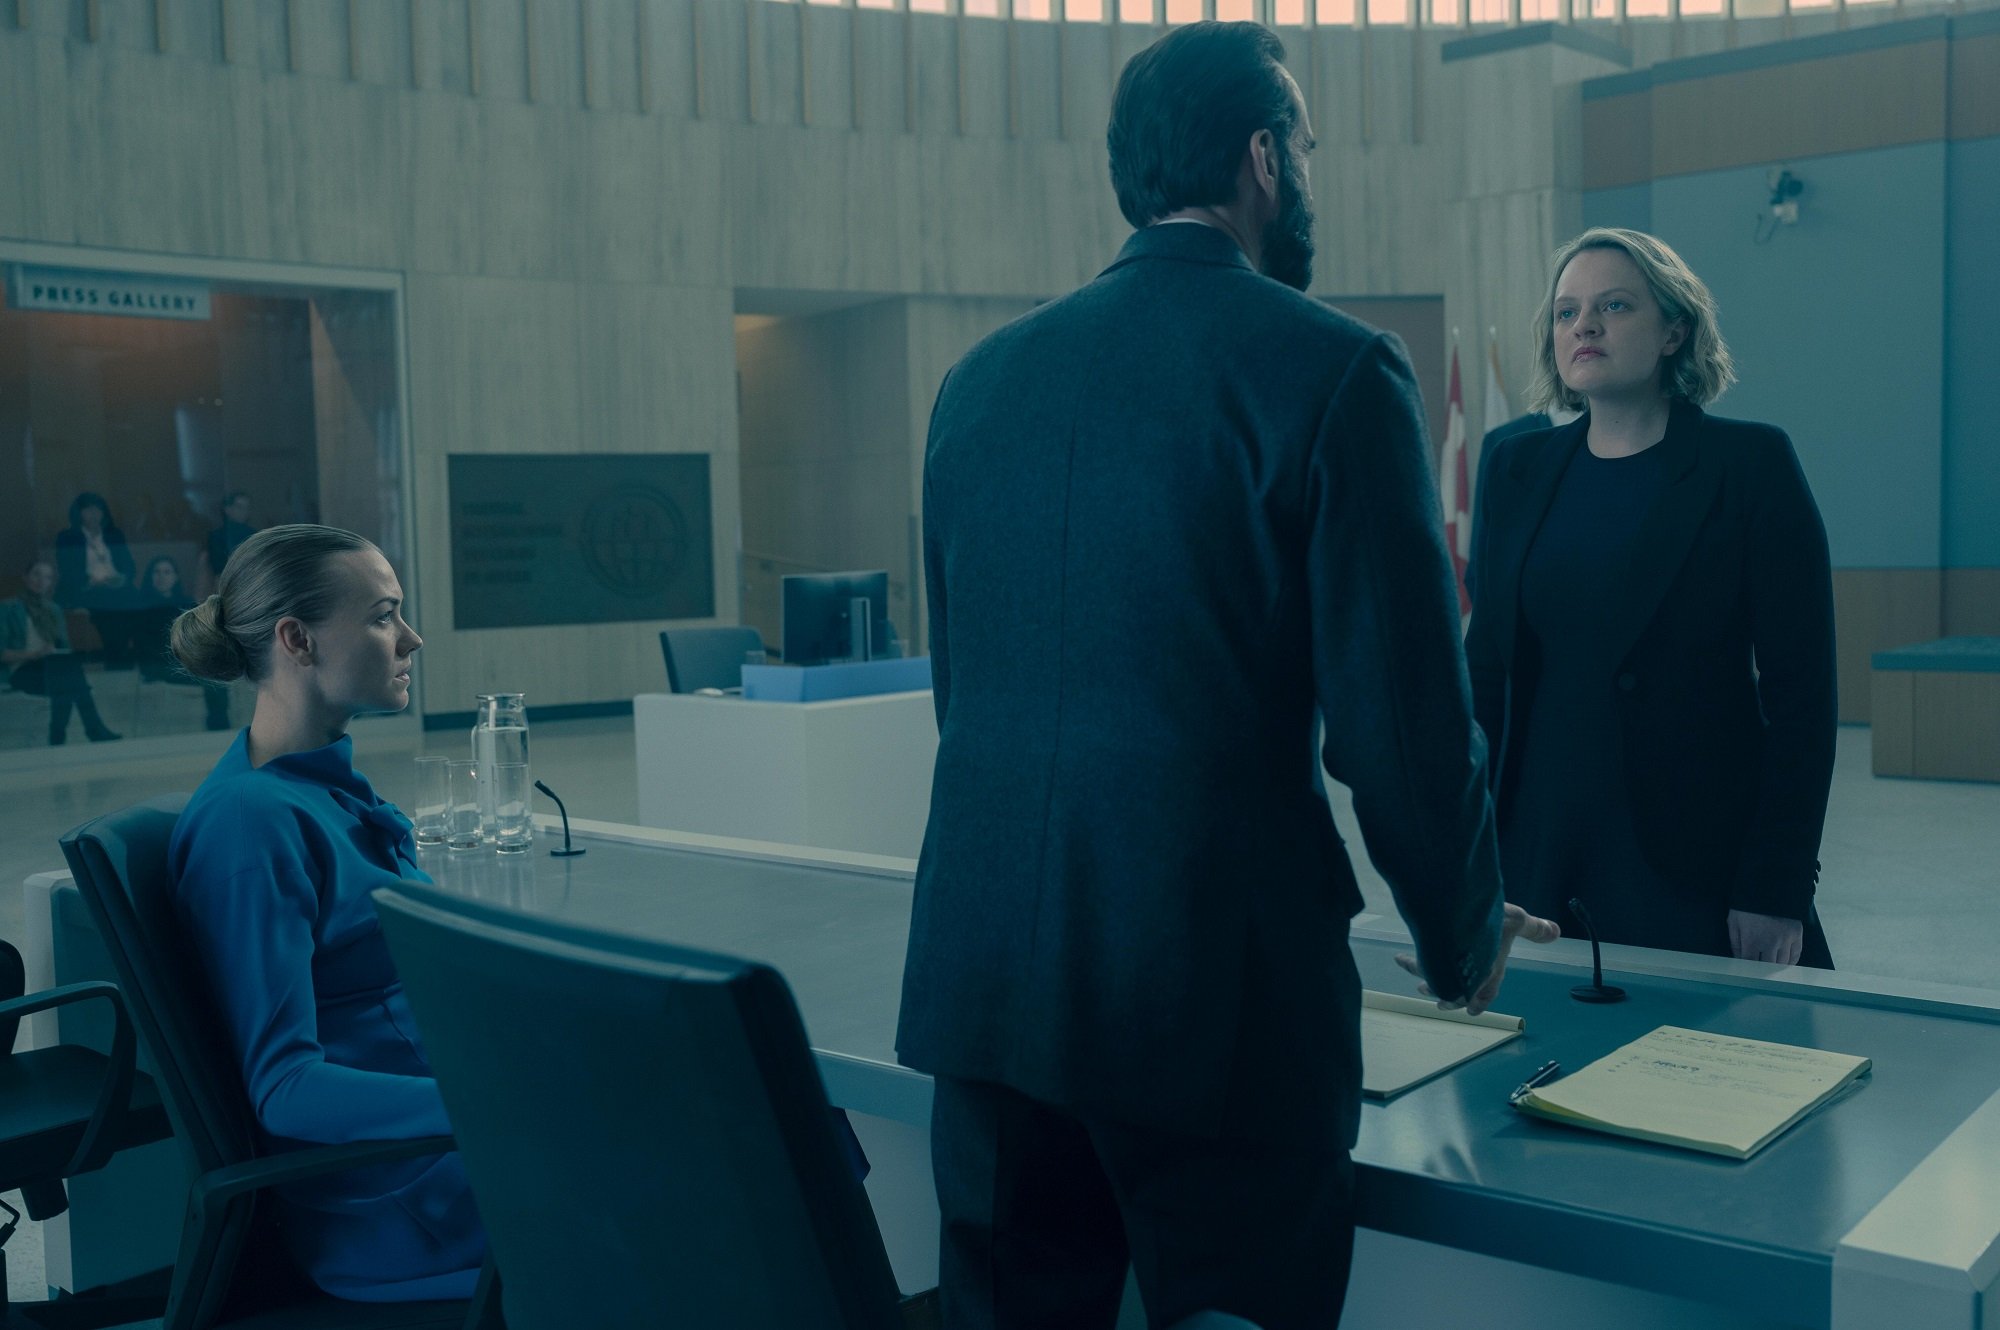 Serena Joy Waterford, Fred Waterford, and June Osborne in a courtroom in season 4 episode 8 of 'The Handmaid's Tale'